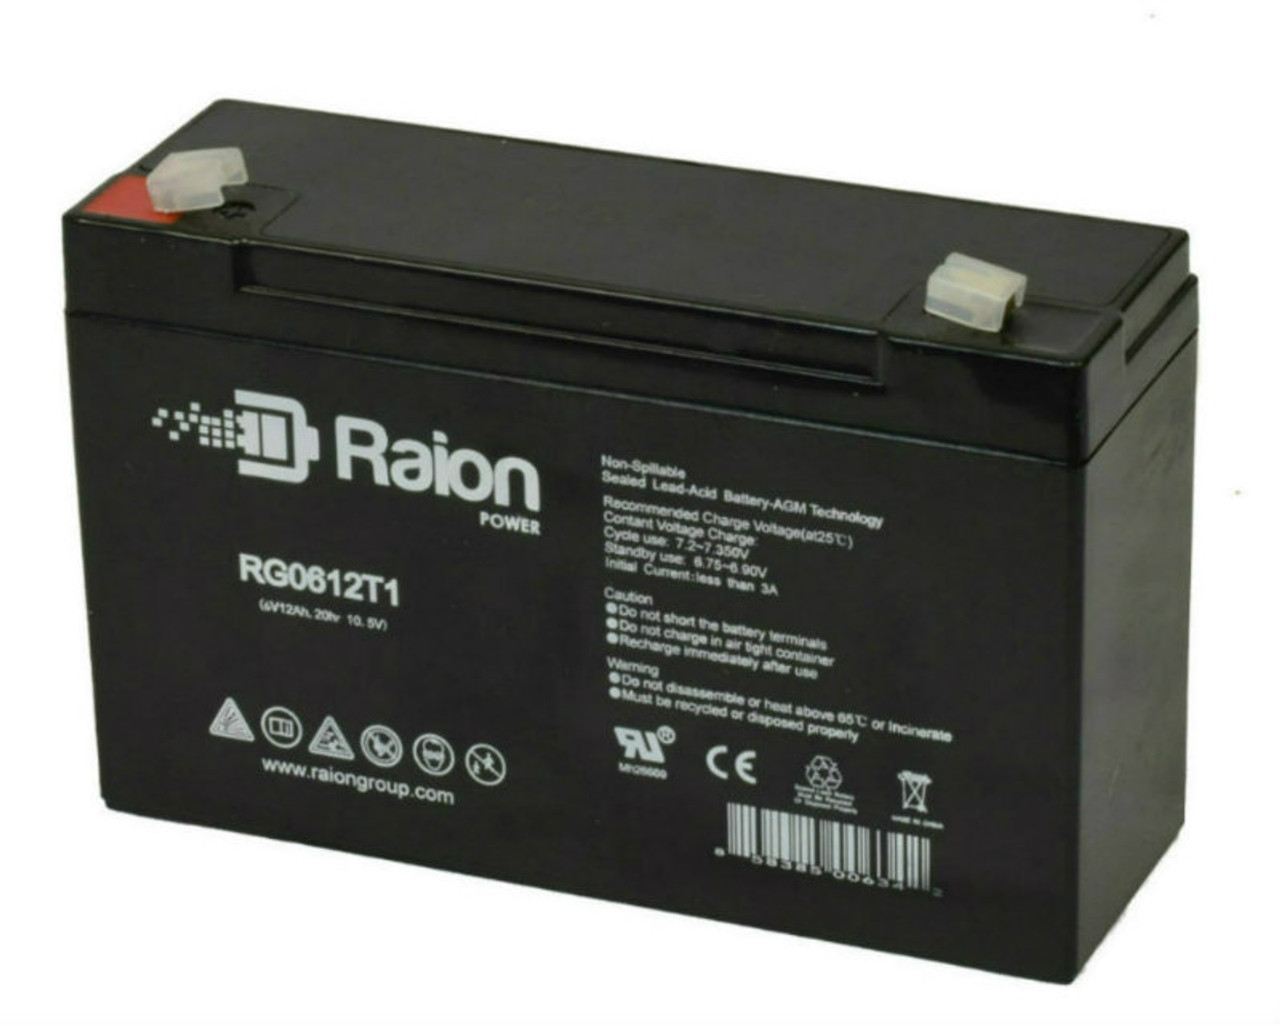 Raion Power RG06120T1 Replacement Battery for Streamlight SL40-F2